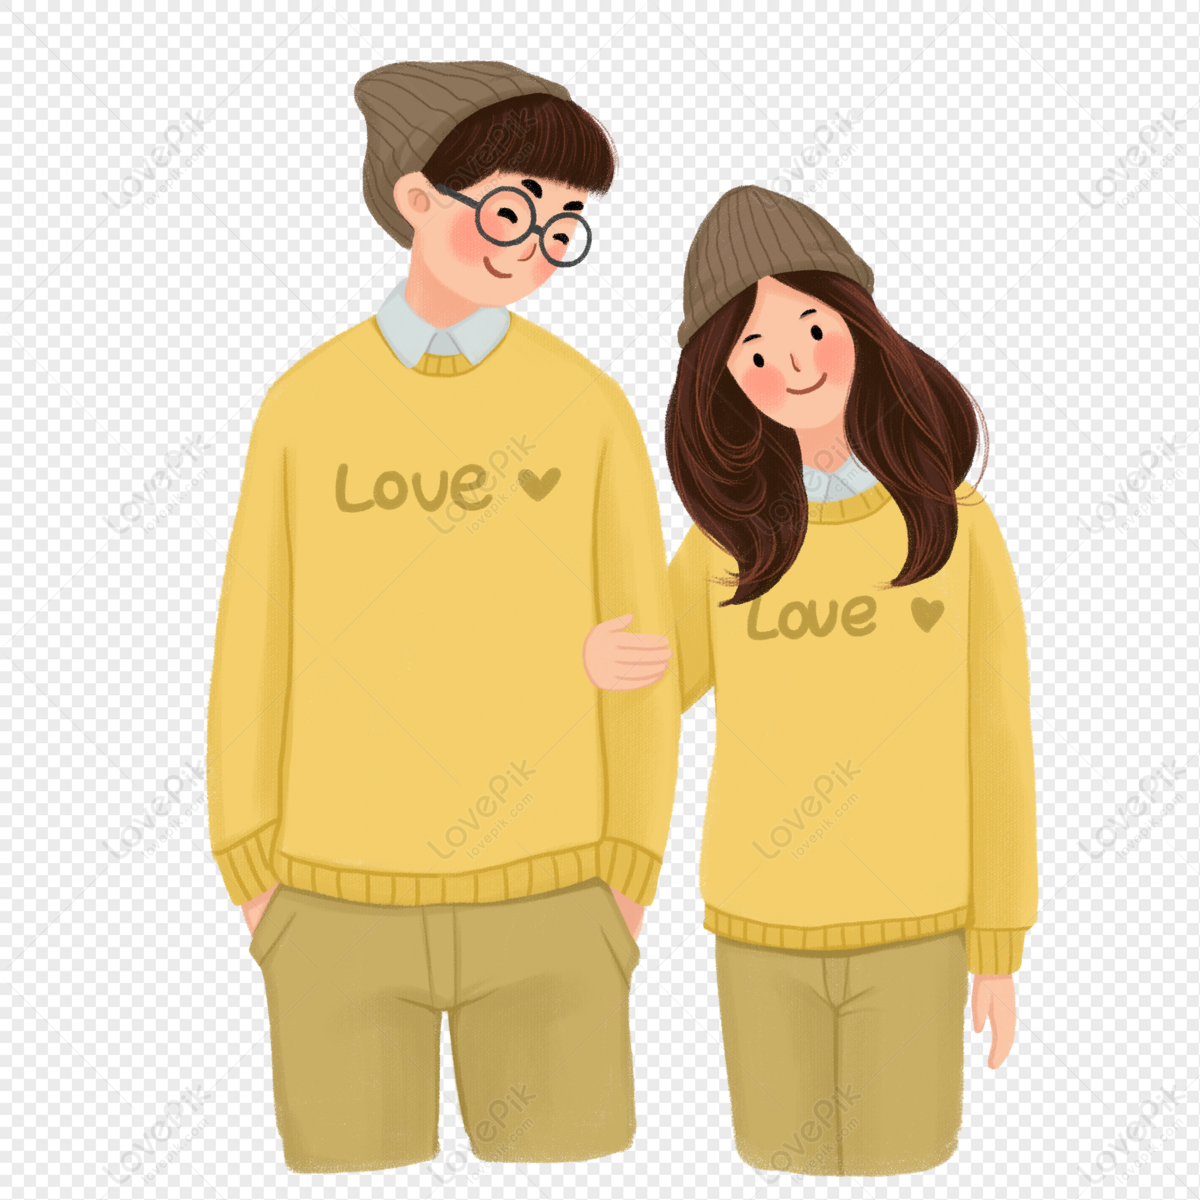 Boys And Girls In Lovers Outfits PNG Transparent Image And Clipart Image  For Free Download - Lovepik | 401668177